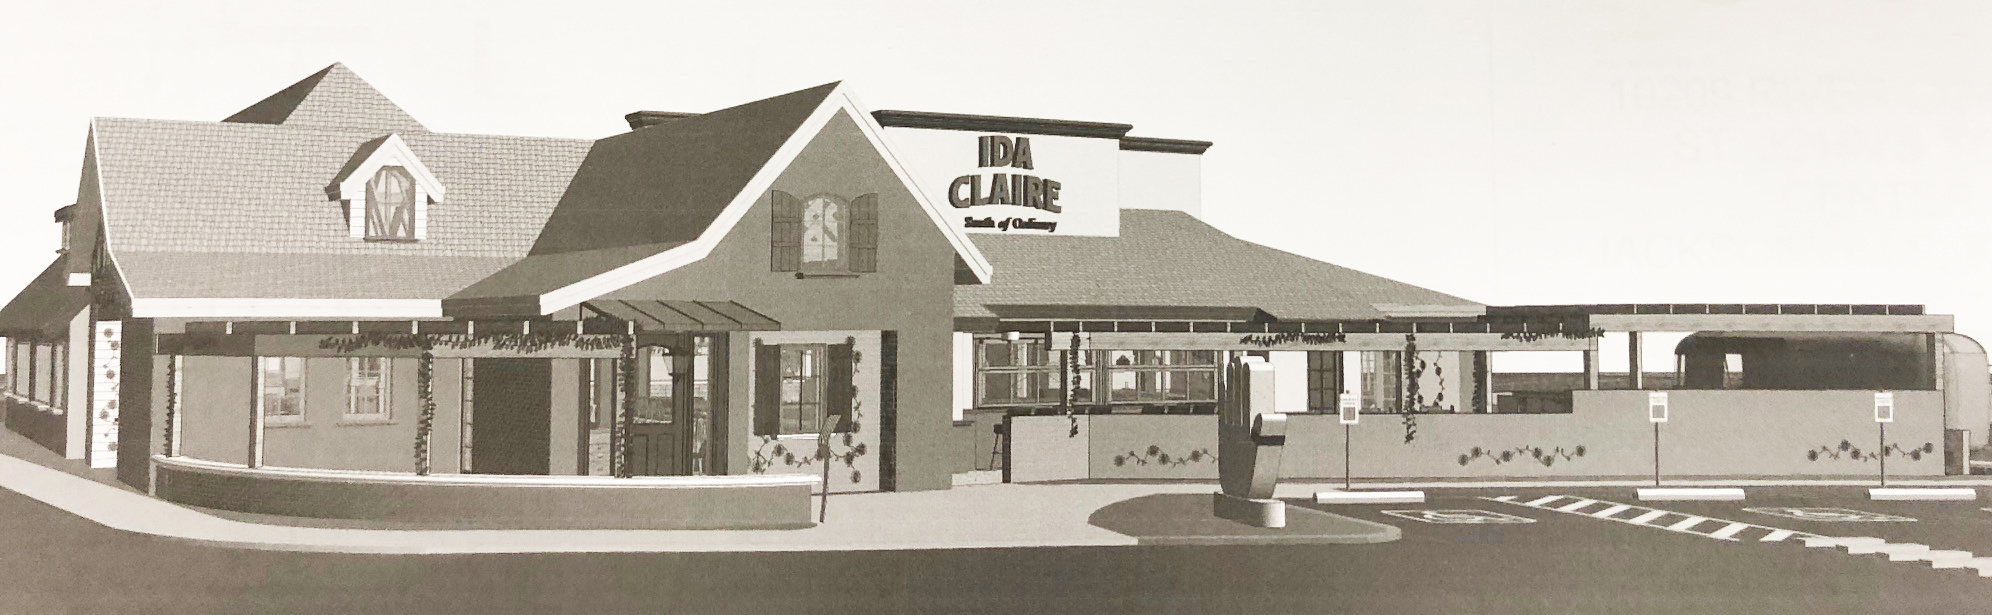 The city issued a permit Tuesday for a $1.8 million renovation of Mimi’s Café into Ida Claire, South of Ordinary.